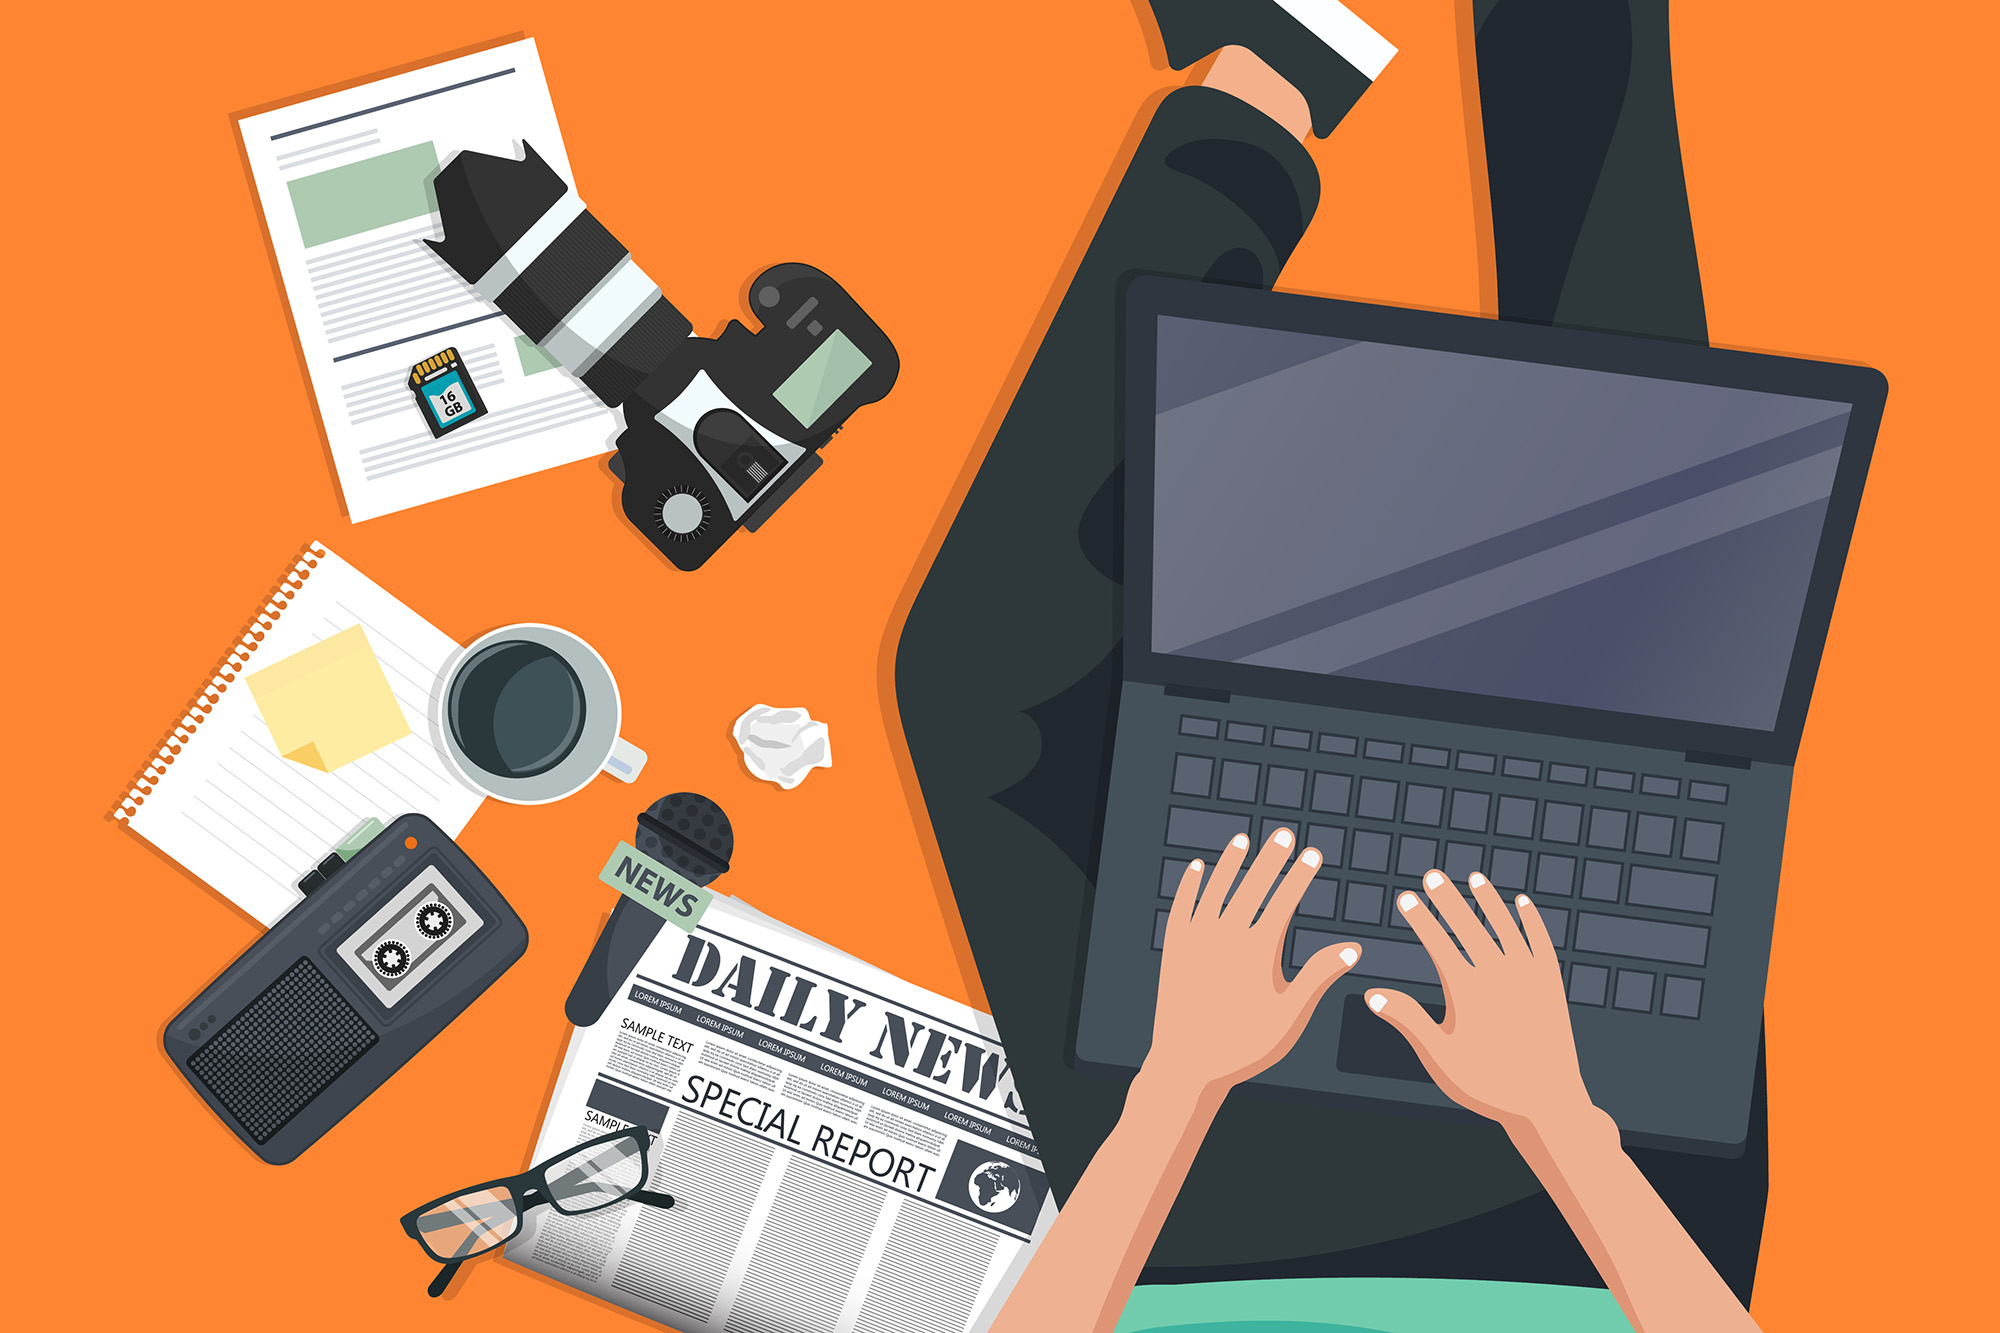 Stock illustration of a person typing on a laptop with various journalism tools around them, like a camera, newspaper, tape recorder, etc.